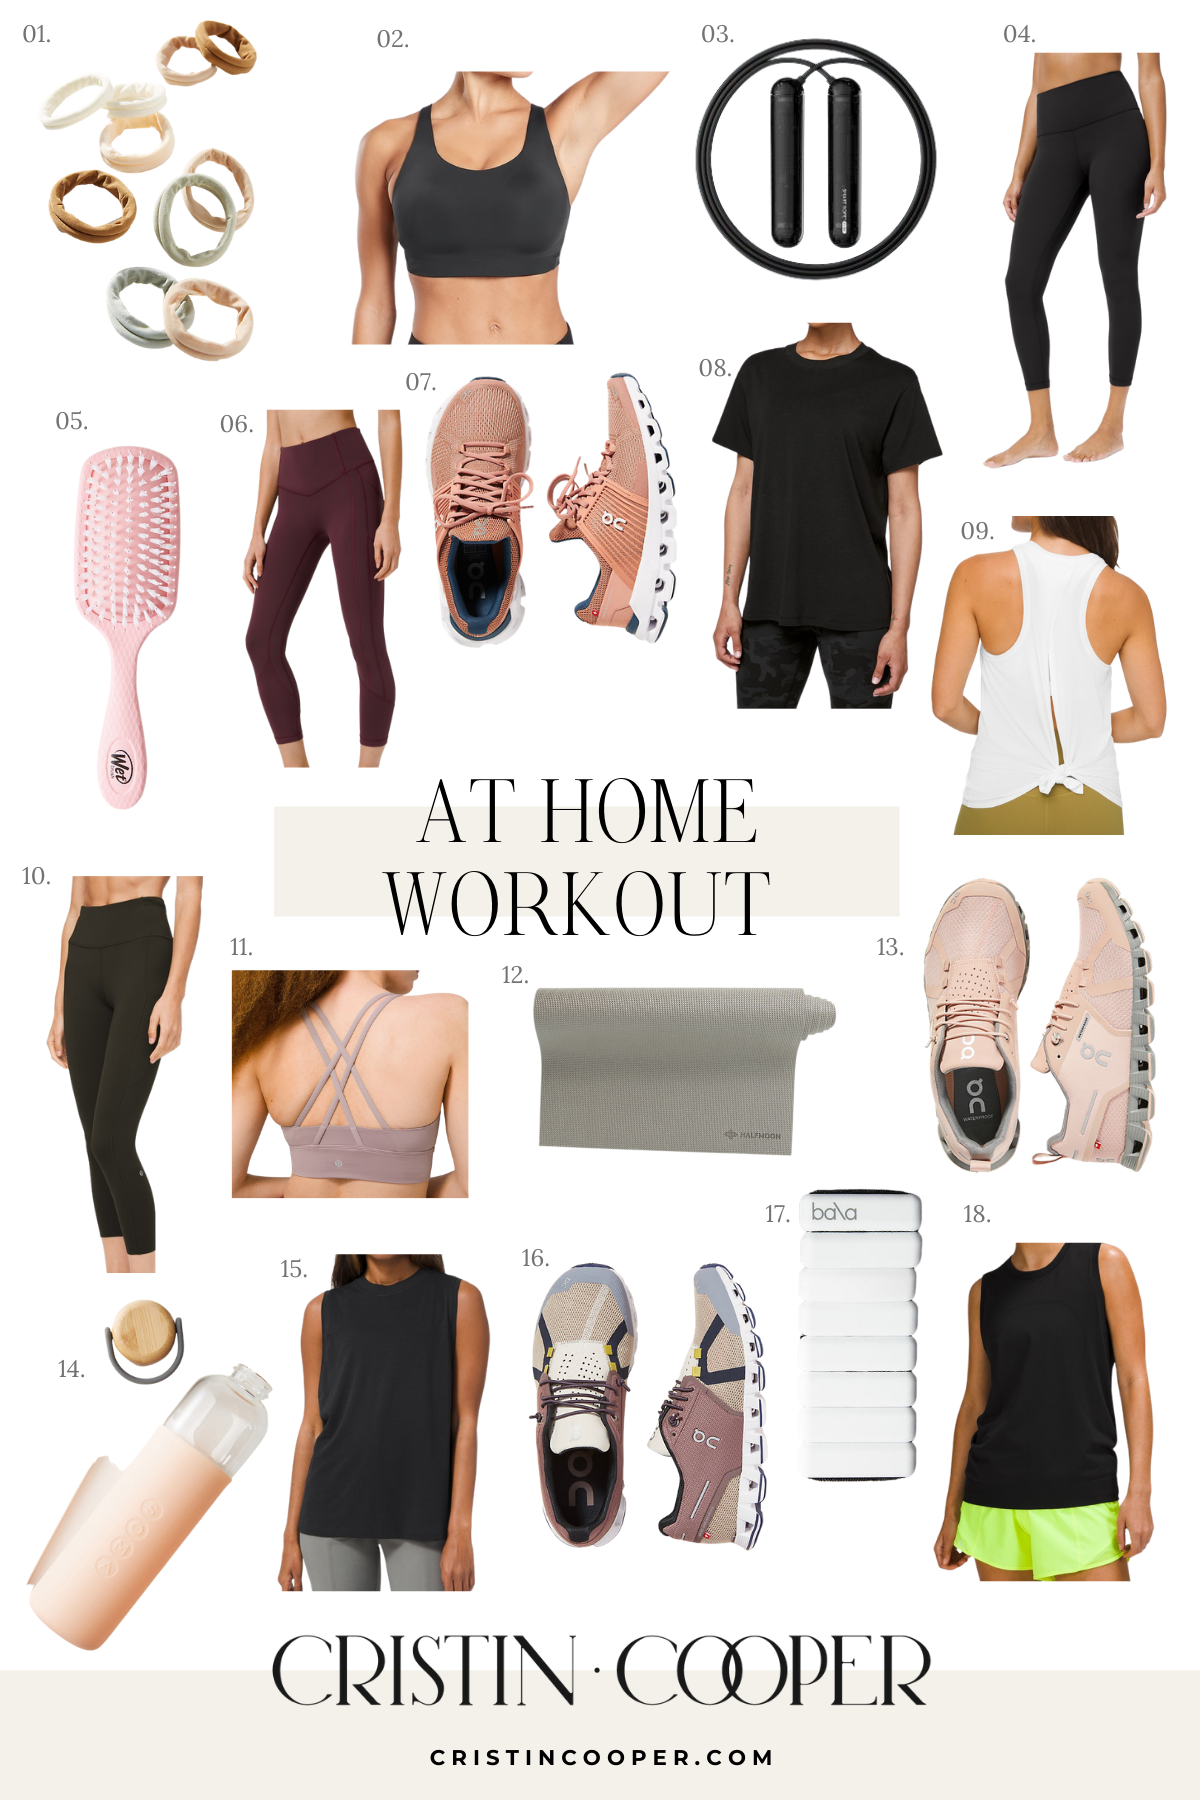 Best at home workout gear to follow fitness apps.